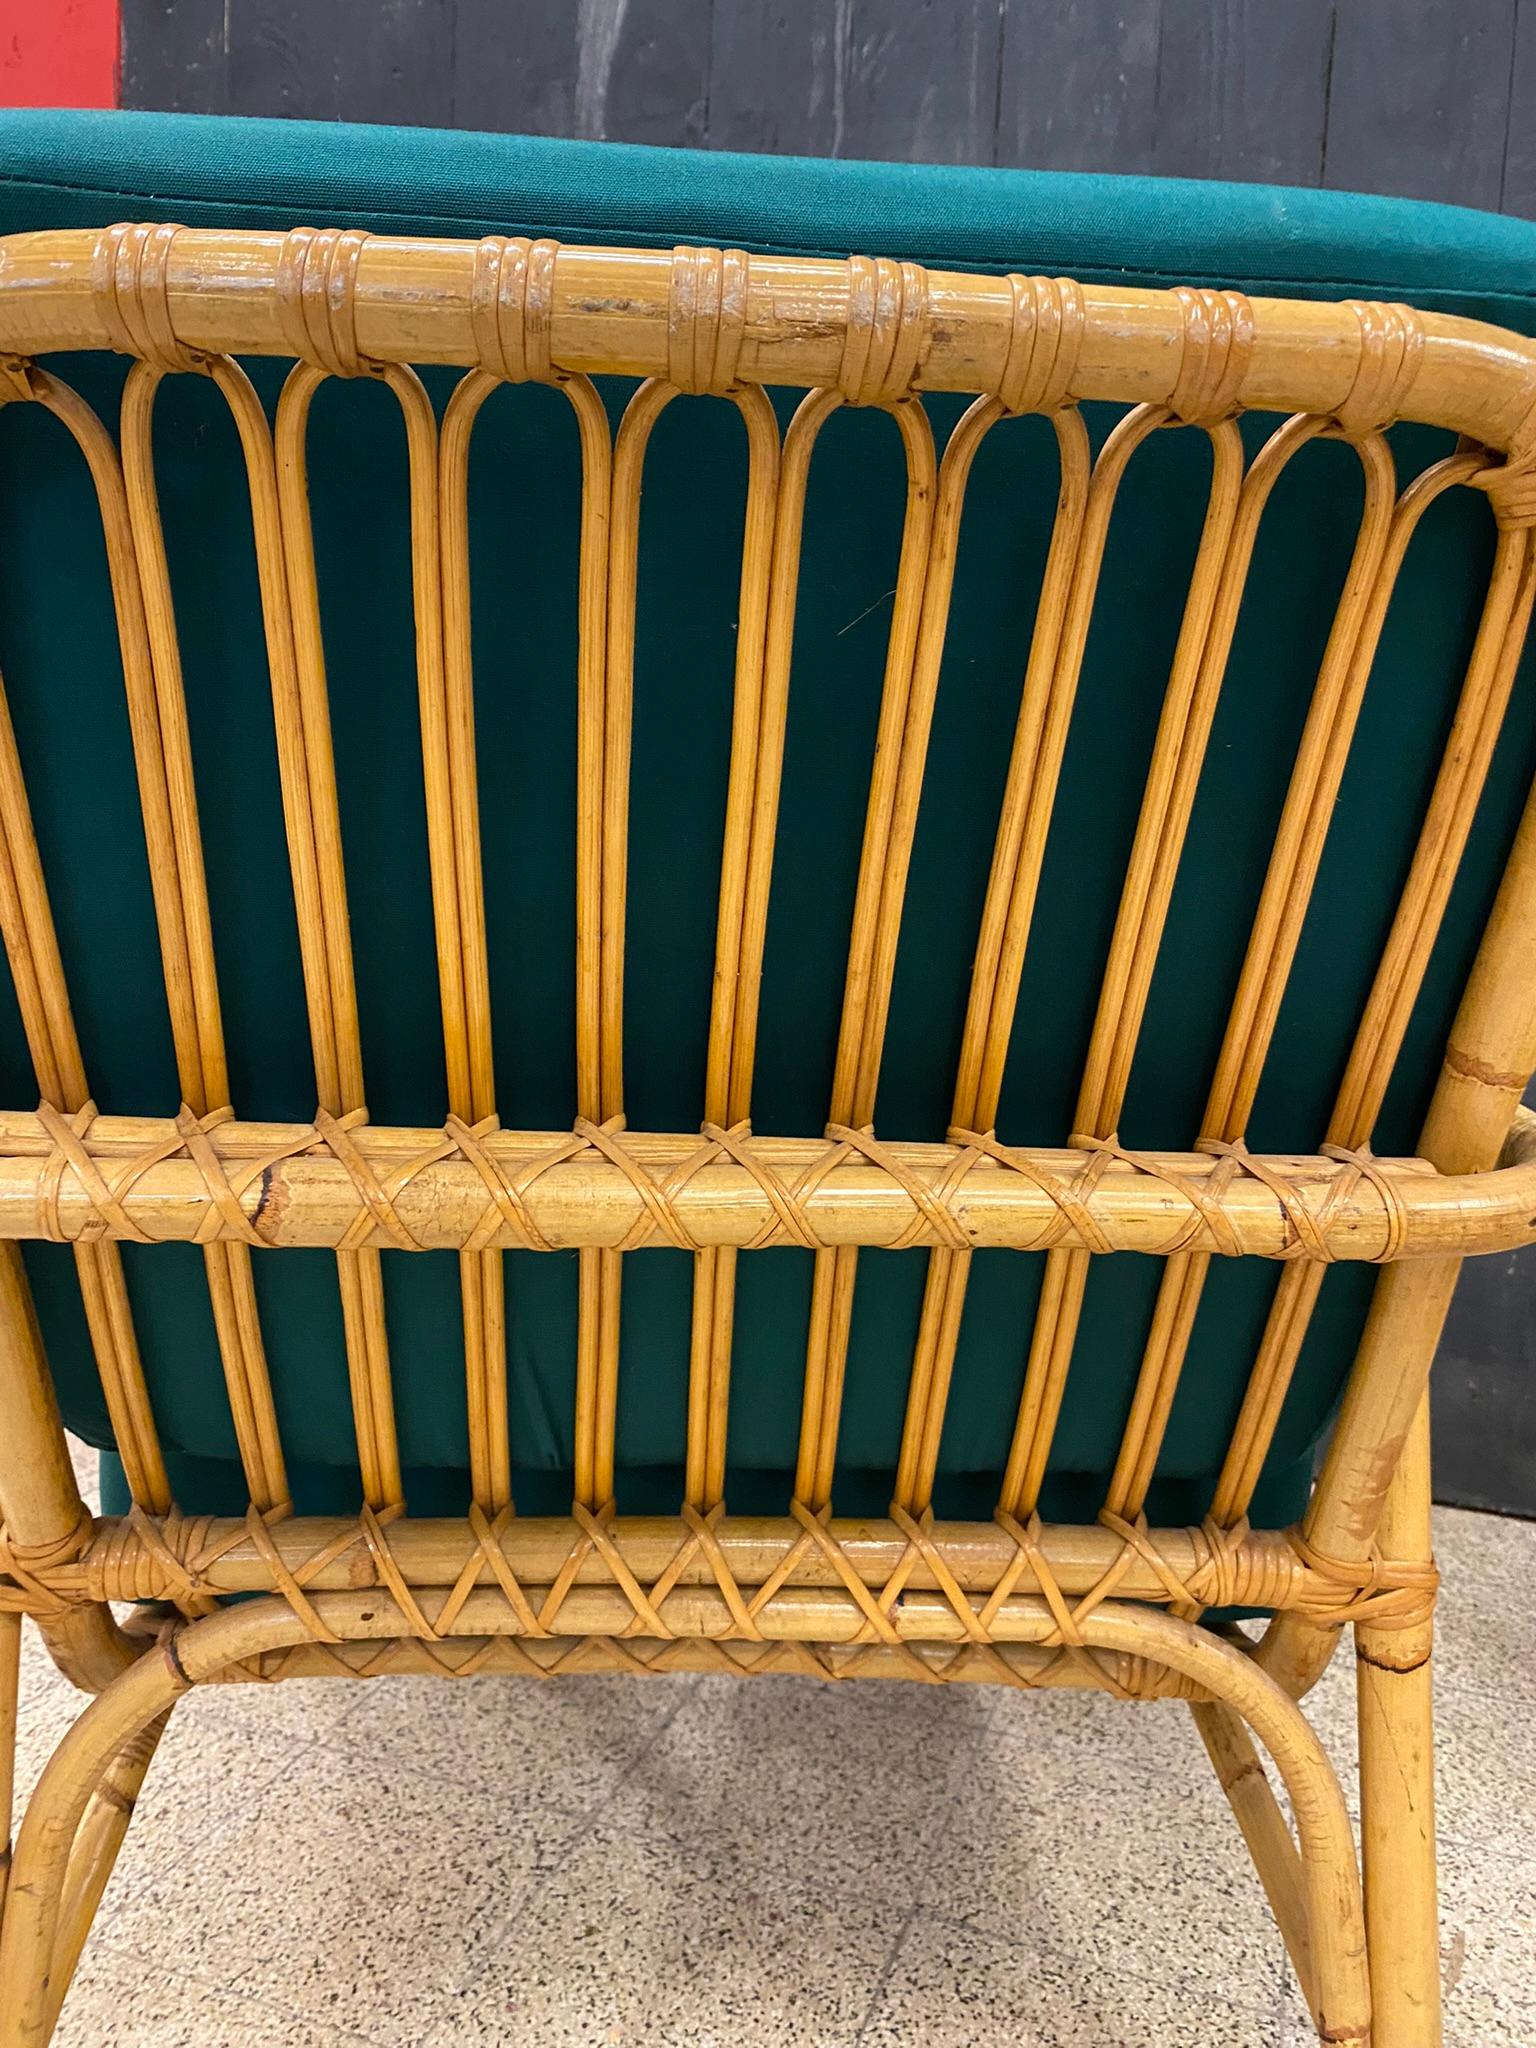 4 Rattan Armchairs and Their Cushions, circa 1970-1980 For Sale 5